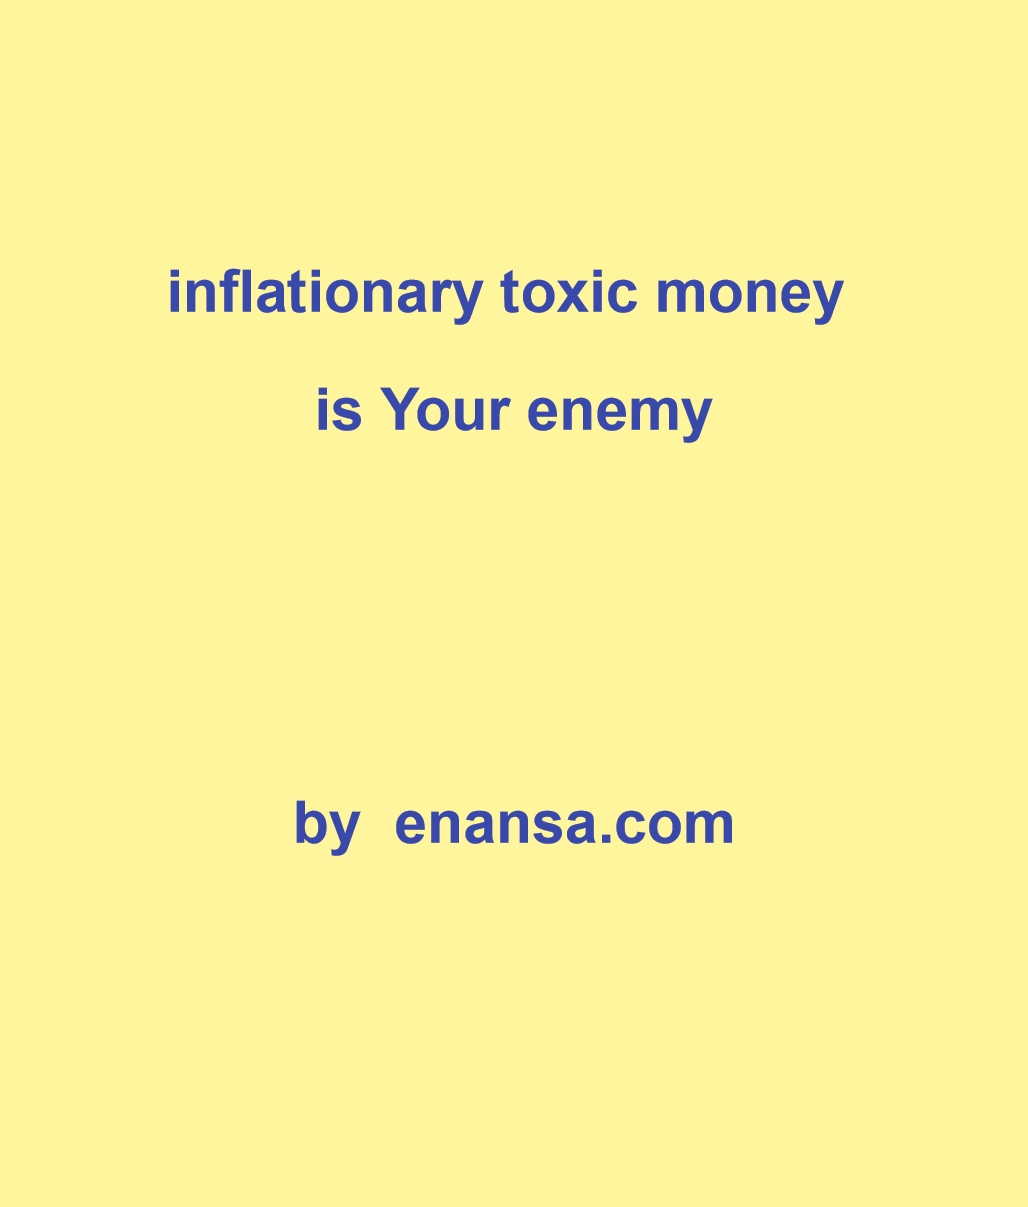 inflationary toxic money is Your enemypng